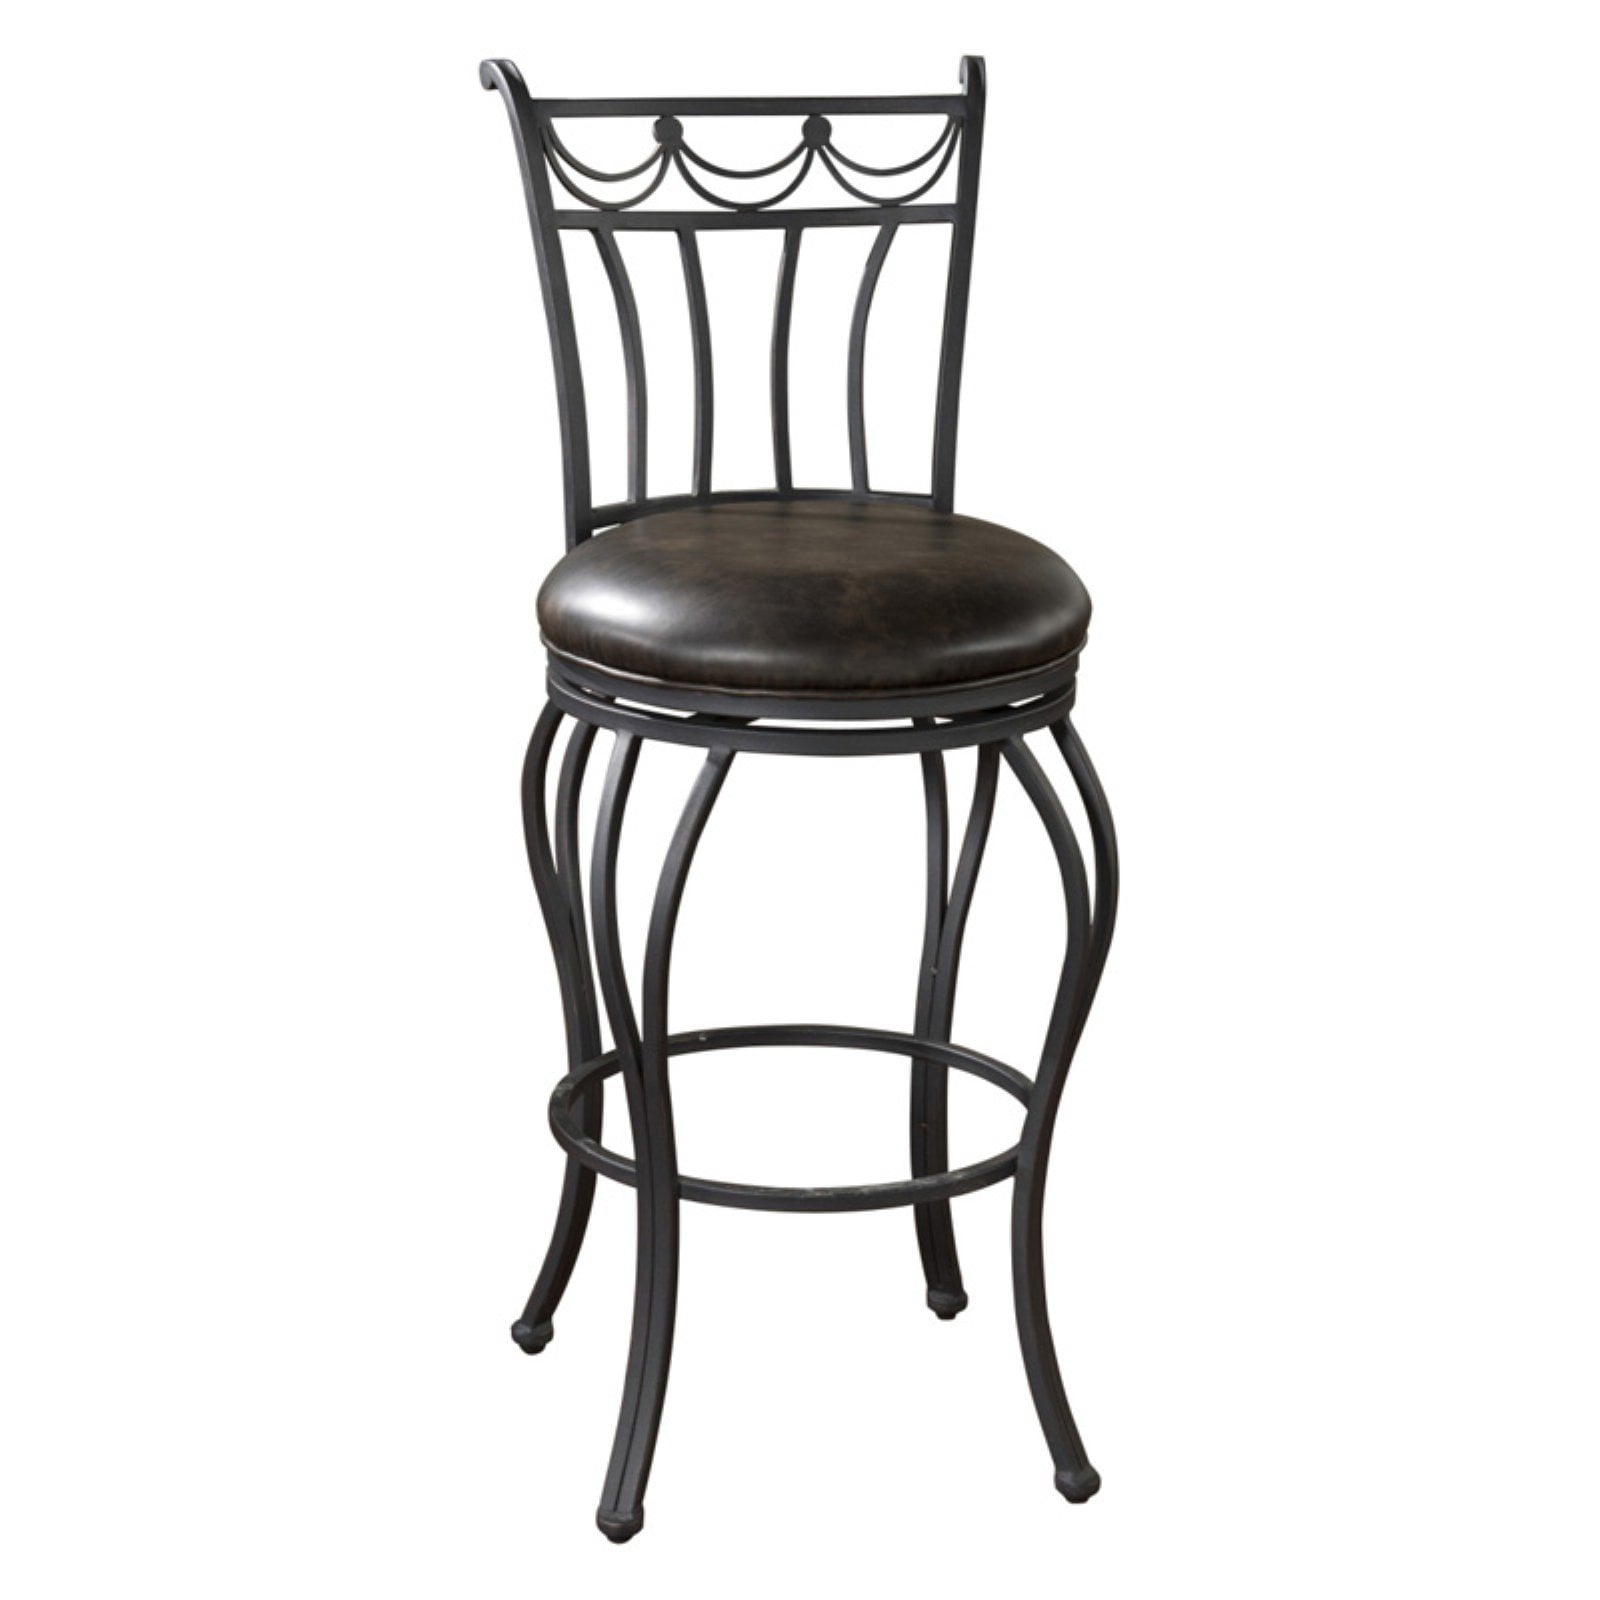 Ahb Abella Swivel Bar Stool Aged Iron With Tobacco Leather